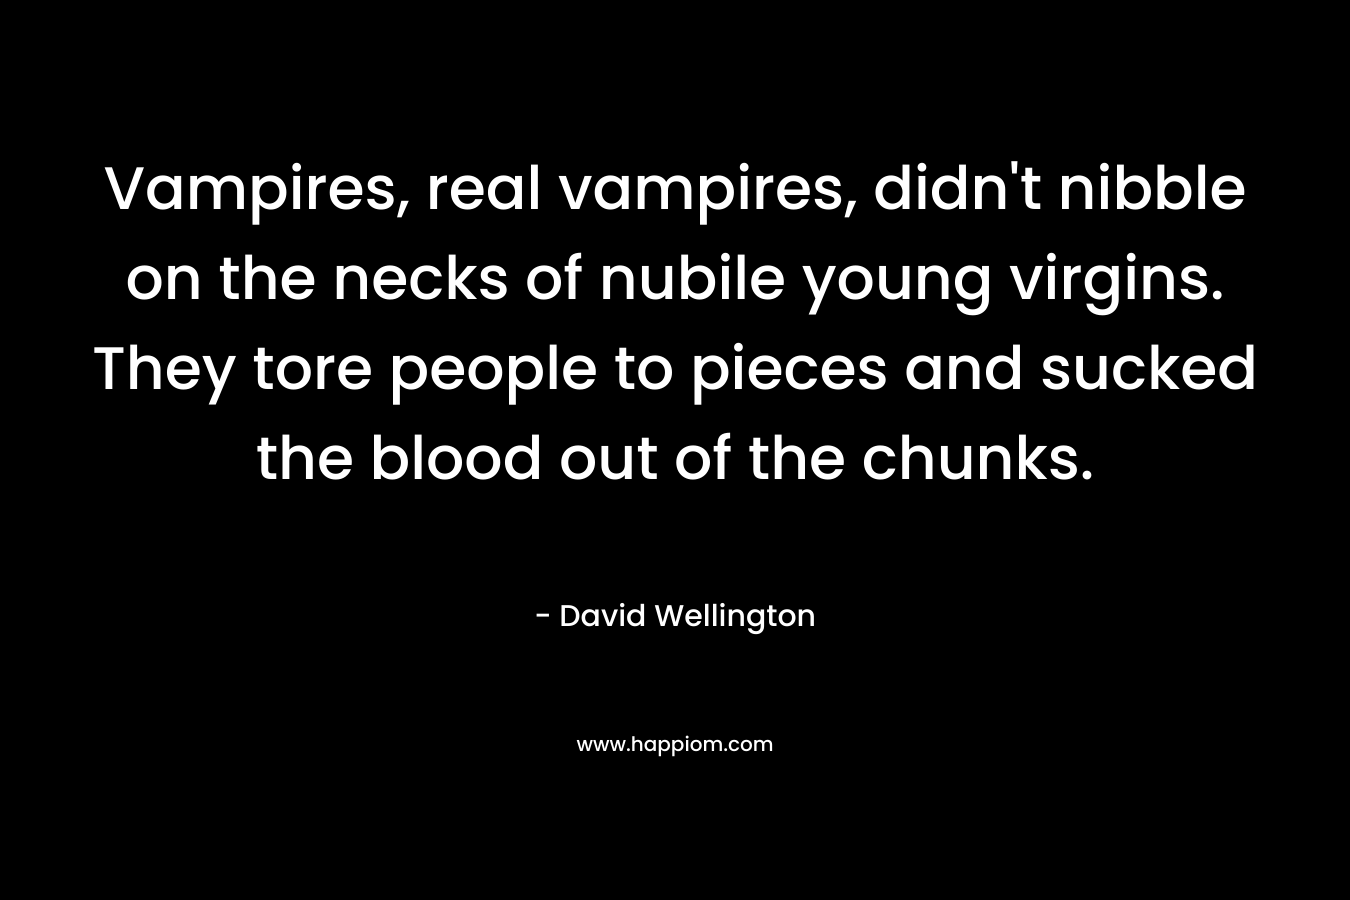 Vampires, real vampires, didn't nibble on the necks of nubile young virgins. They tore people to pieces and sucked the blood out of the chunks. 